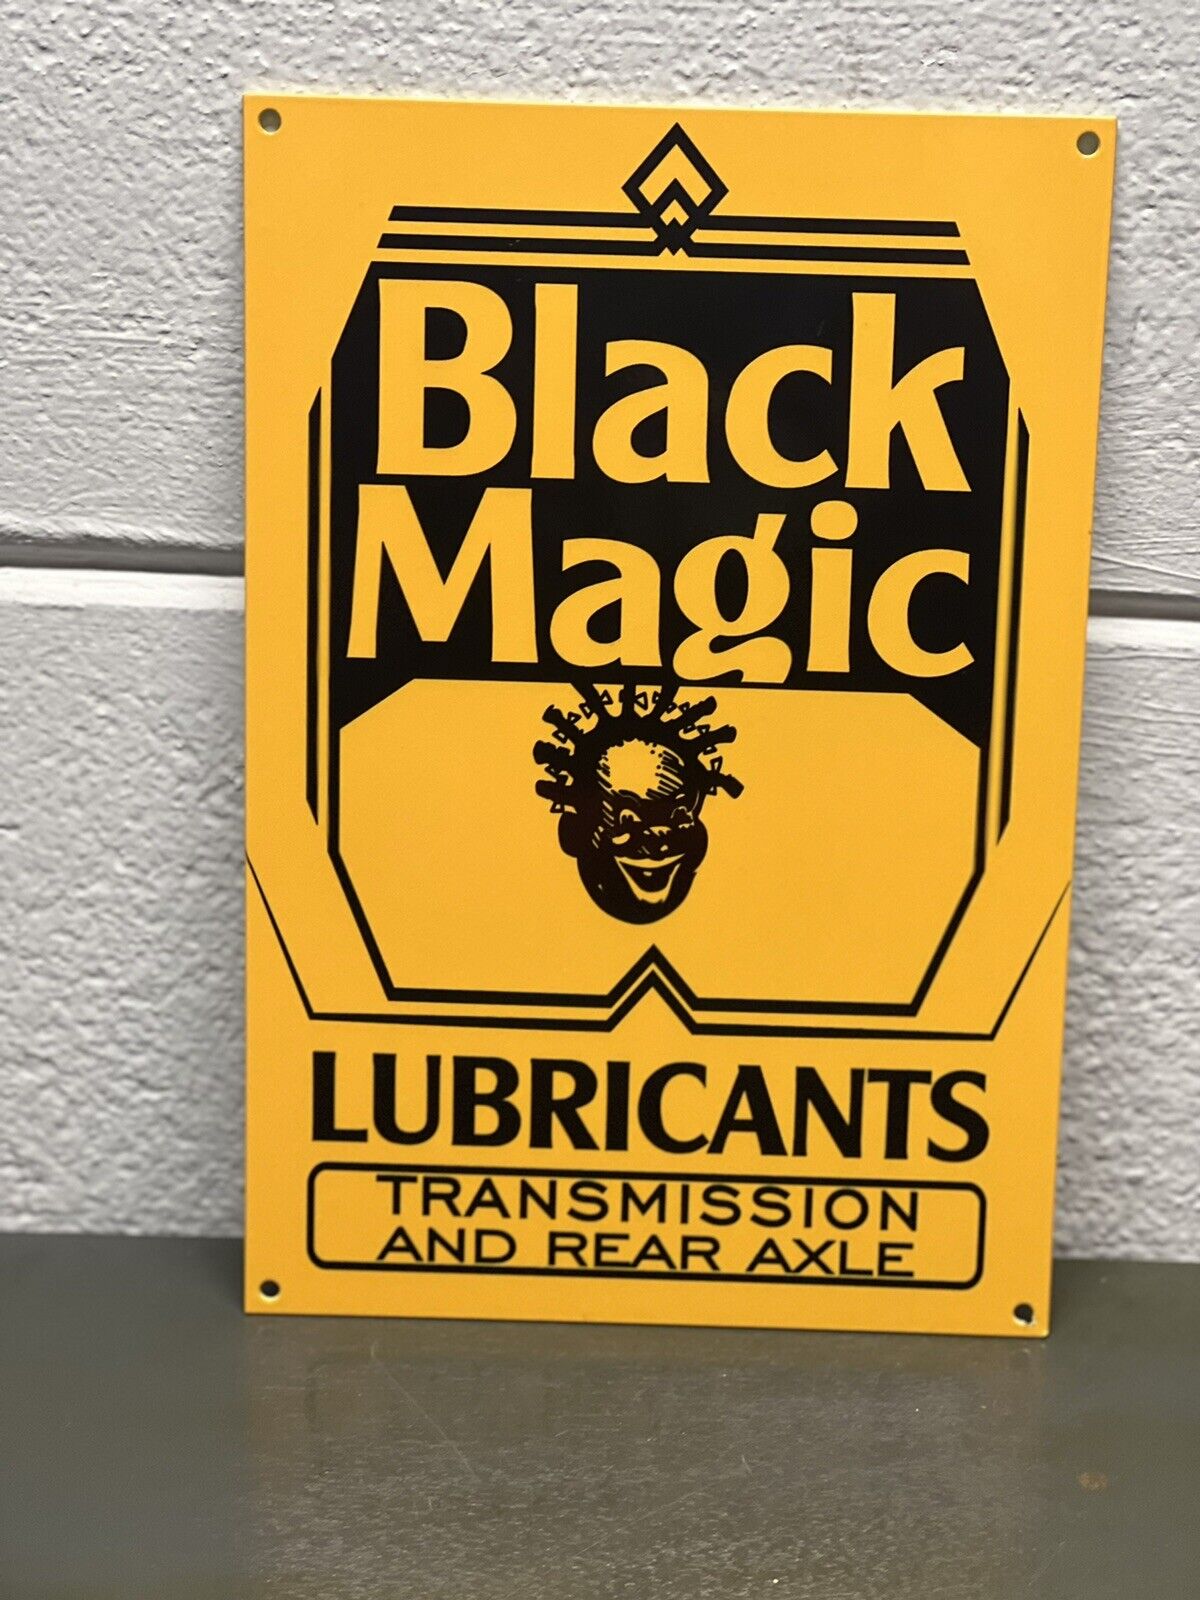 Black Magic Lubricants Thick Metal Sign Transmission Axle Grease Gas Oil Garage